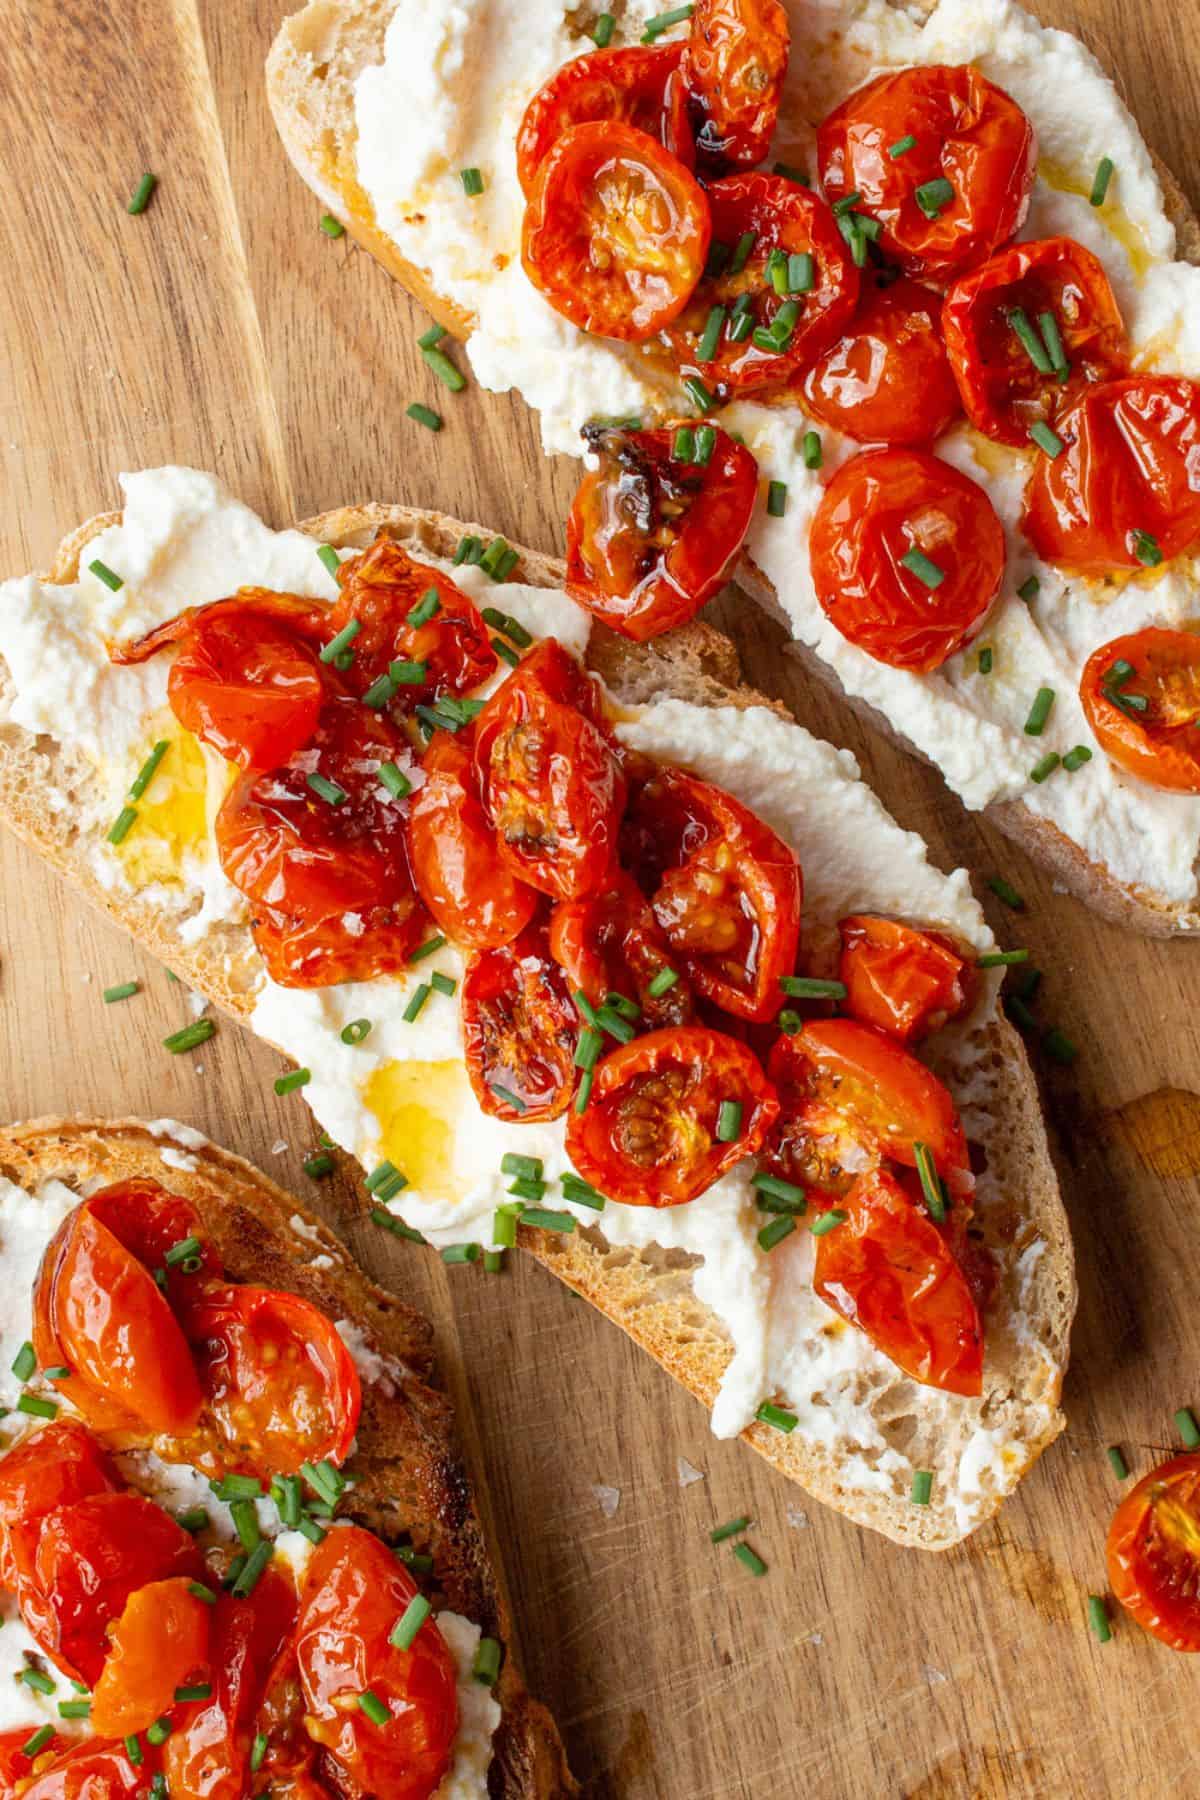 3 slices of sourdough bread with cream cheese and roasted cherry tomatoes topped with chives on a wooden background.